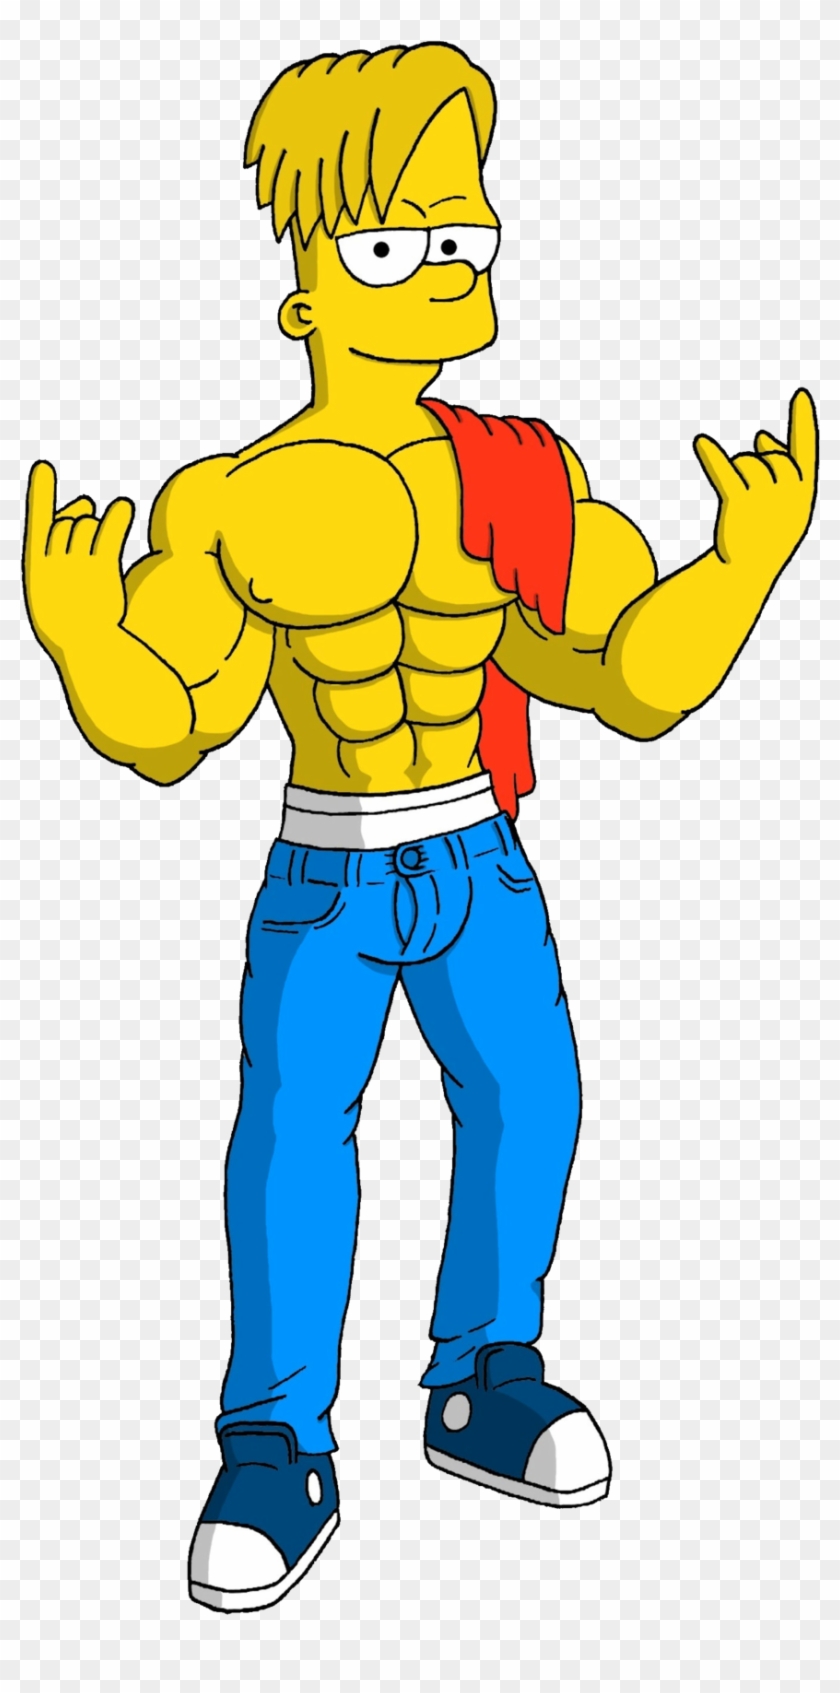 Muscle Teen Bart Simpson By Paradogta Muscle Teen Bart - Bart Simpson Muscle #452837